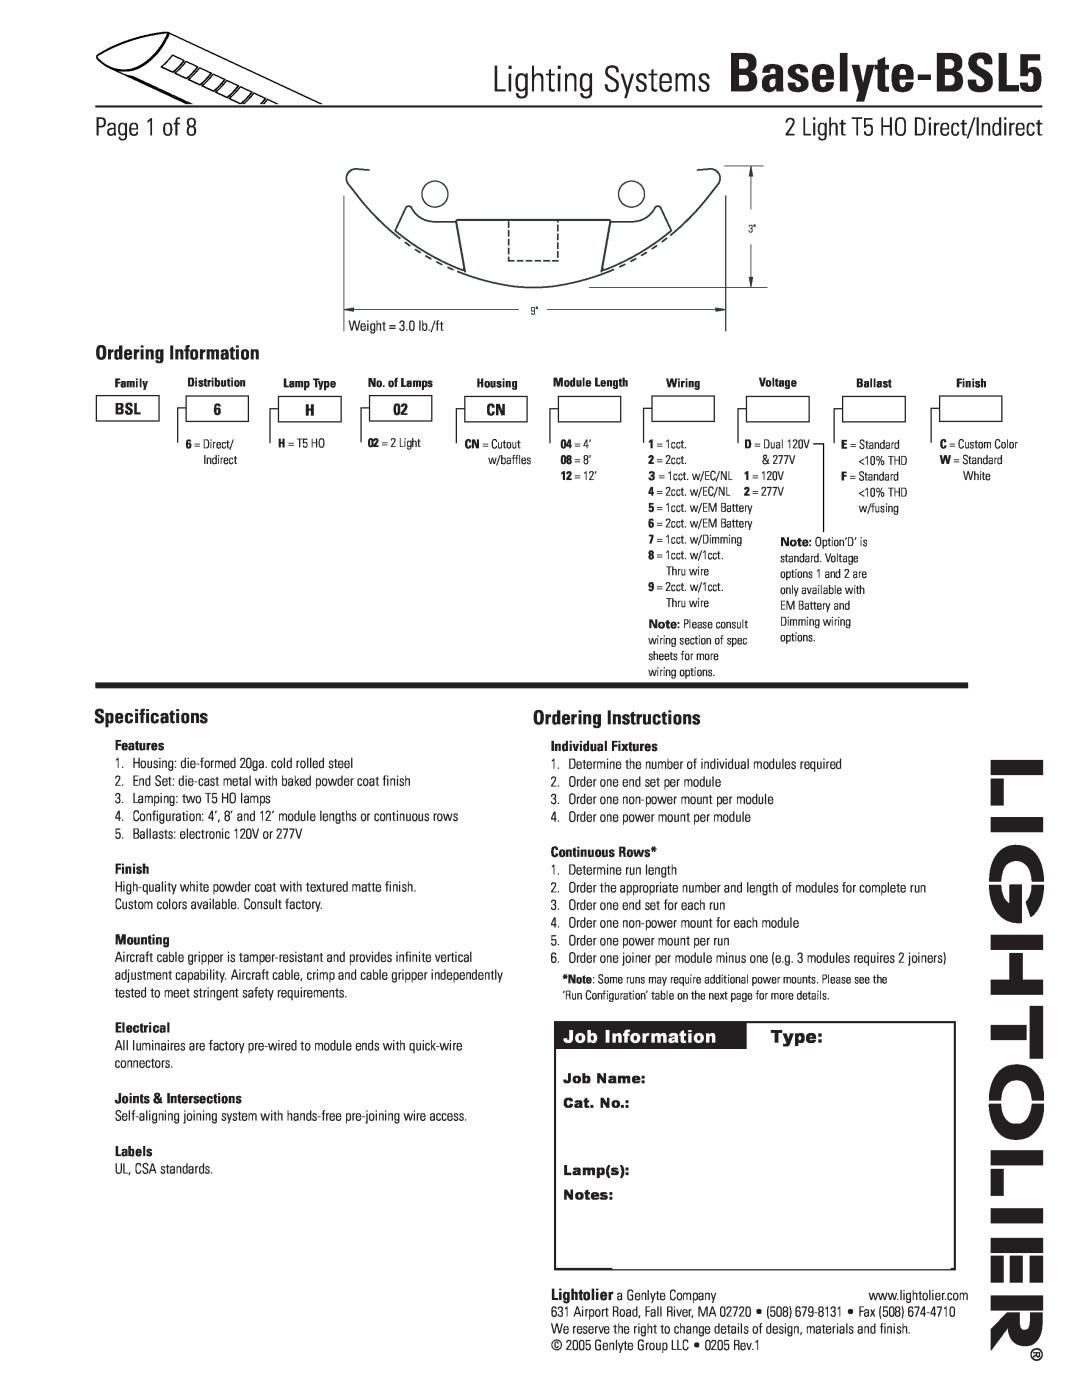 Lightolier specifications Lighting Systems Baselyte-BSL5, Page  of, Light T5 HO Direct/Indirect, Ordering Information 